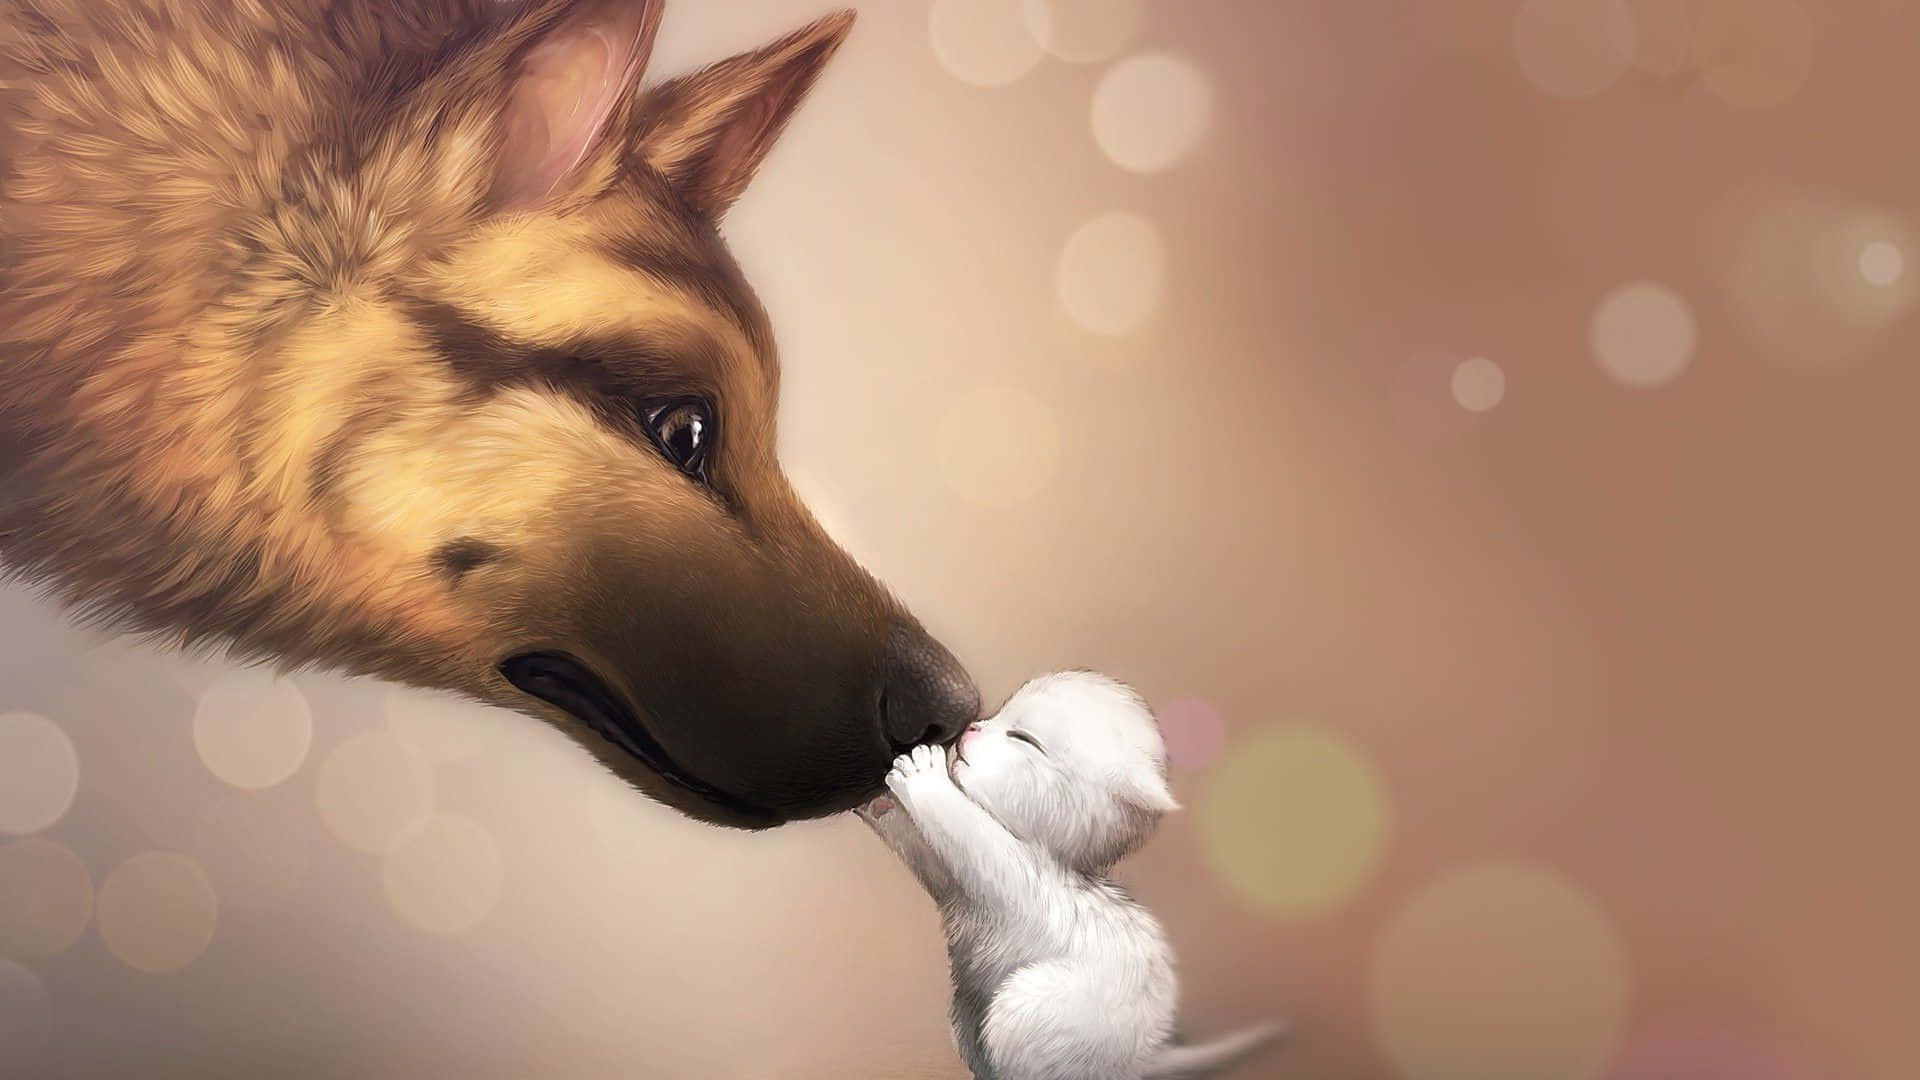 Two Best Friends - Kitten and Puppy Sharing a Moment Wallpaper